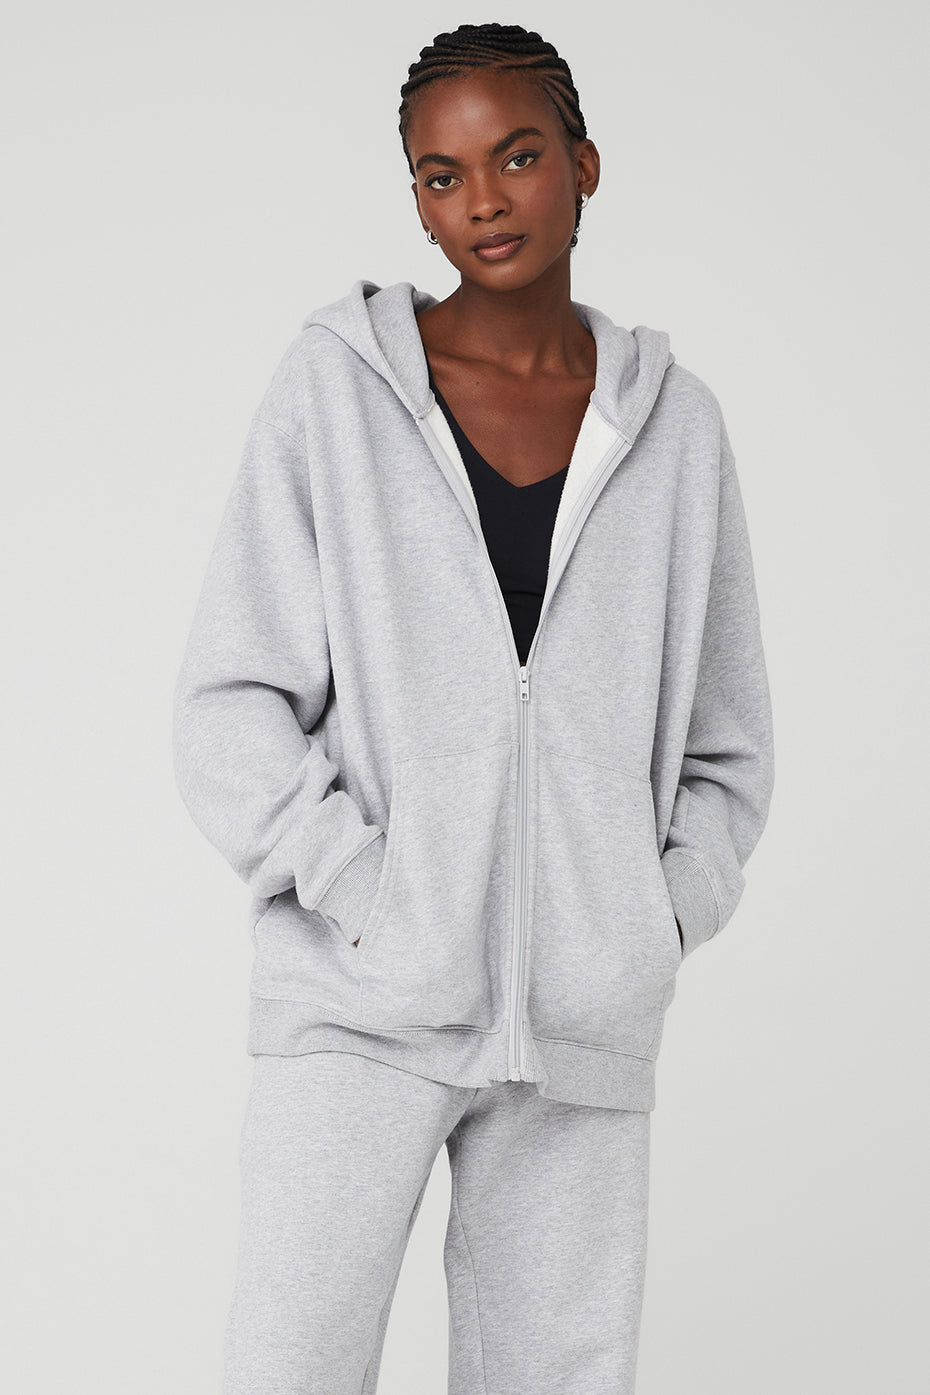 Buy ALO YOGA Accolade Hoodie - Women's, Dove Grey Heather, Large at